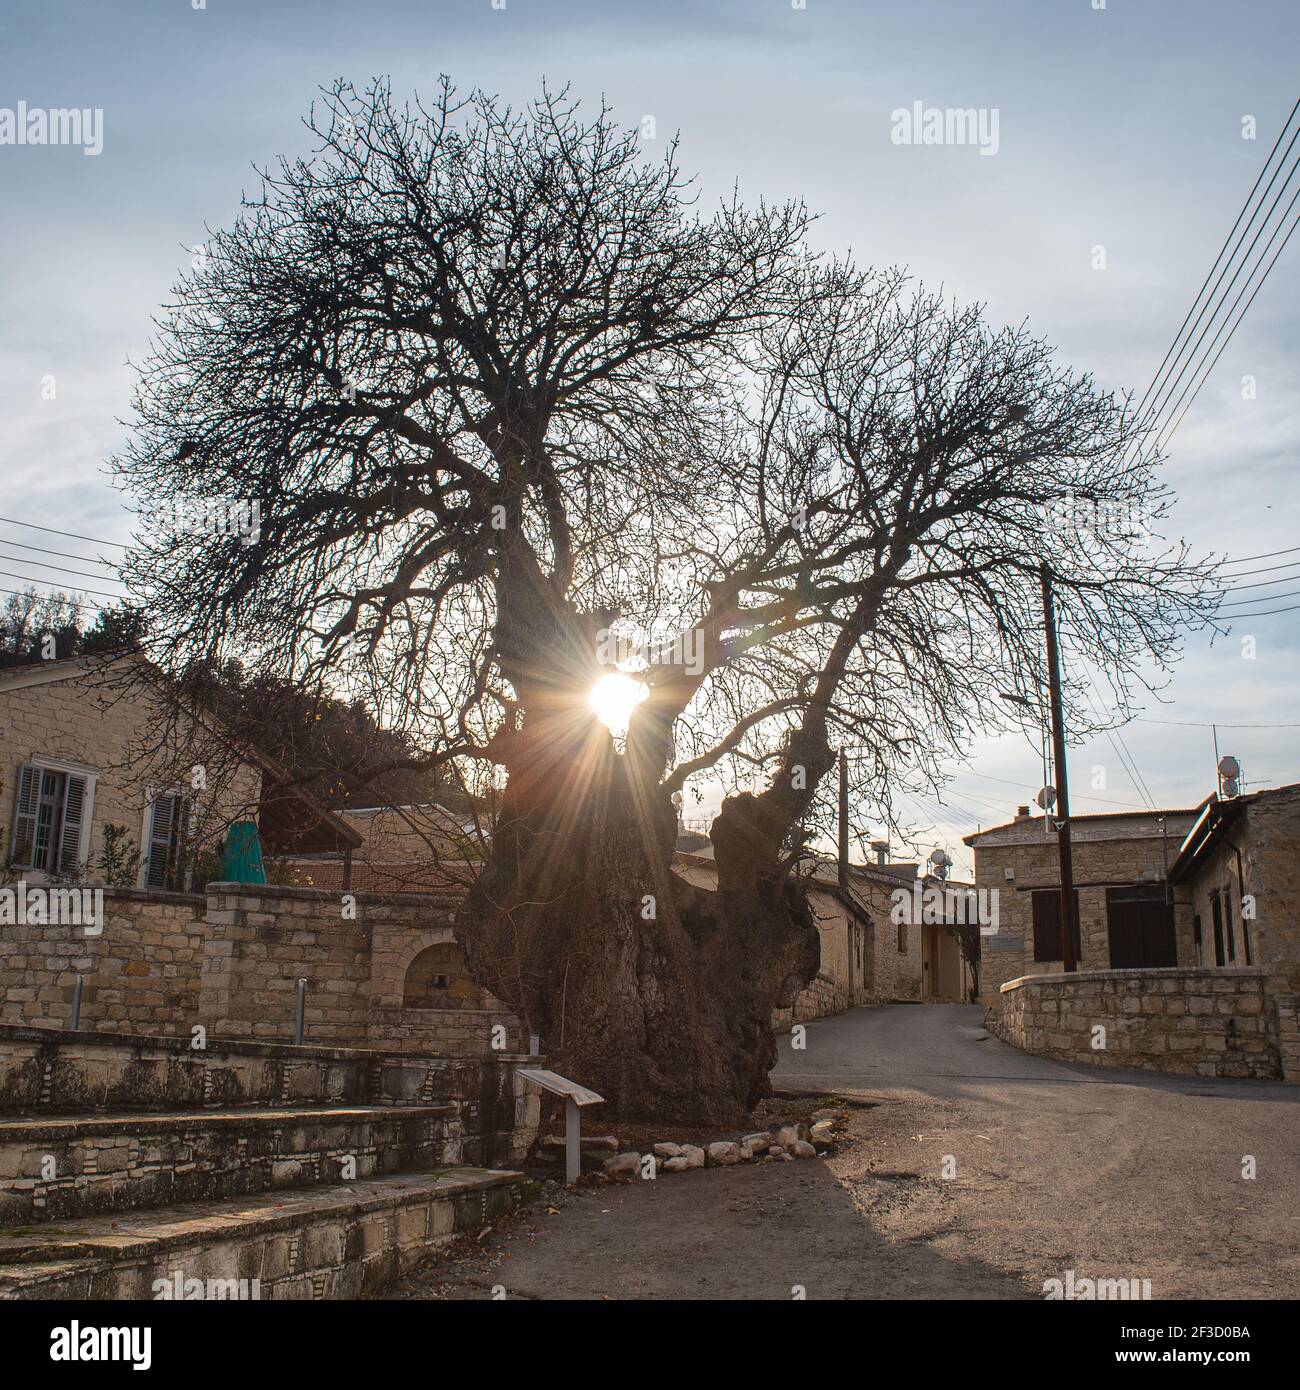 1500 years old terebinth (terpentine) tree in the middle of Apesia village, Cyprus. Backlit silhouette of ancient tree at sunset with sun shining thro Stock Photo